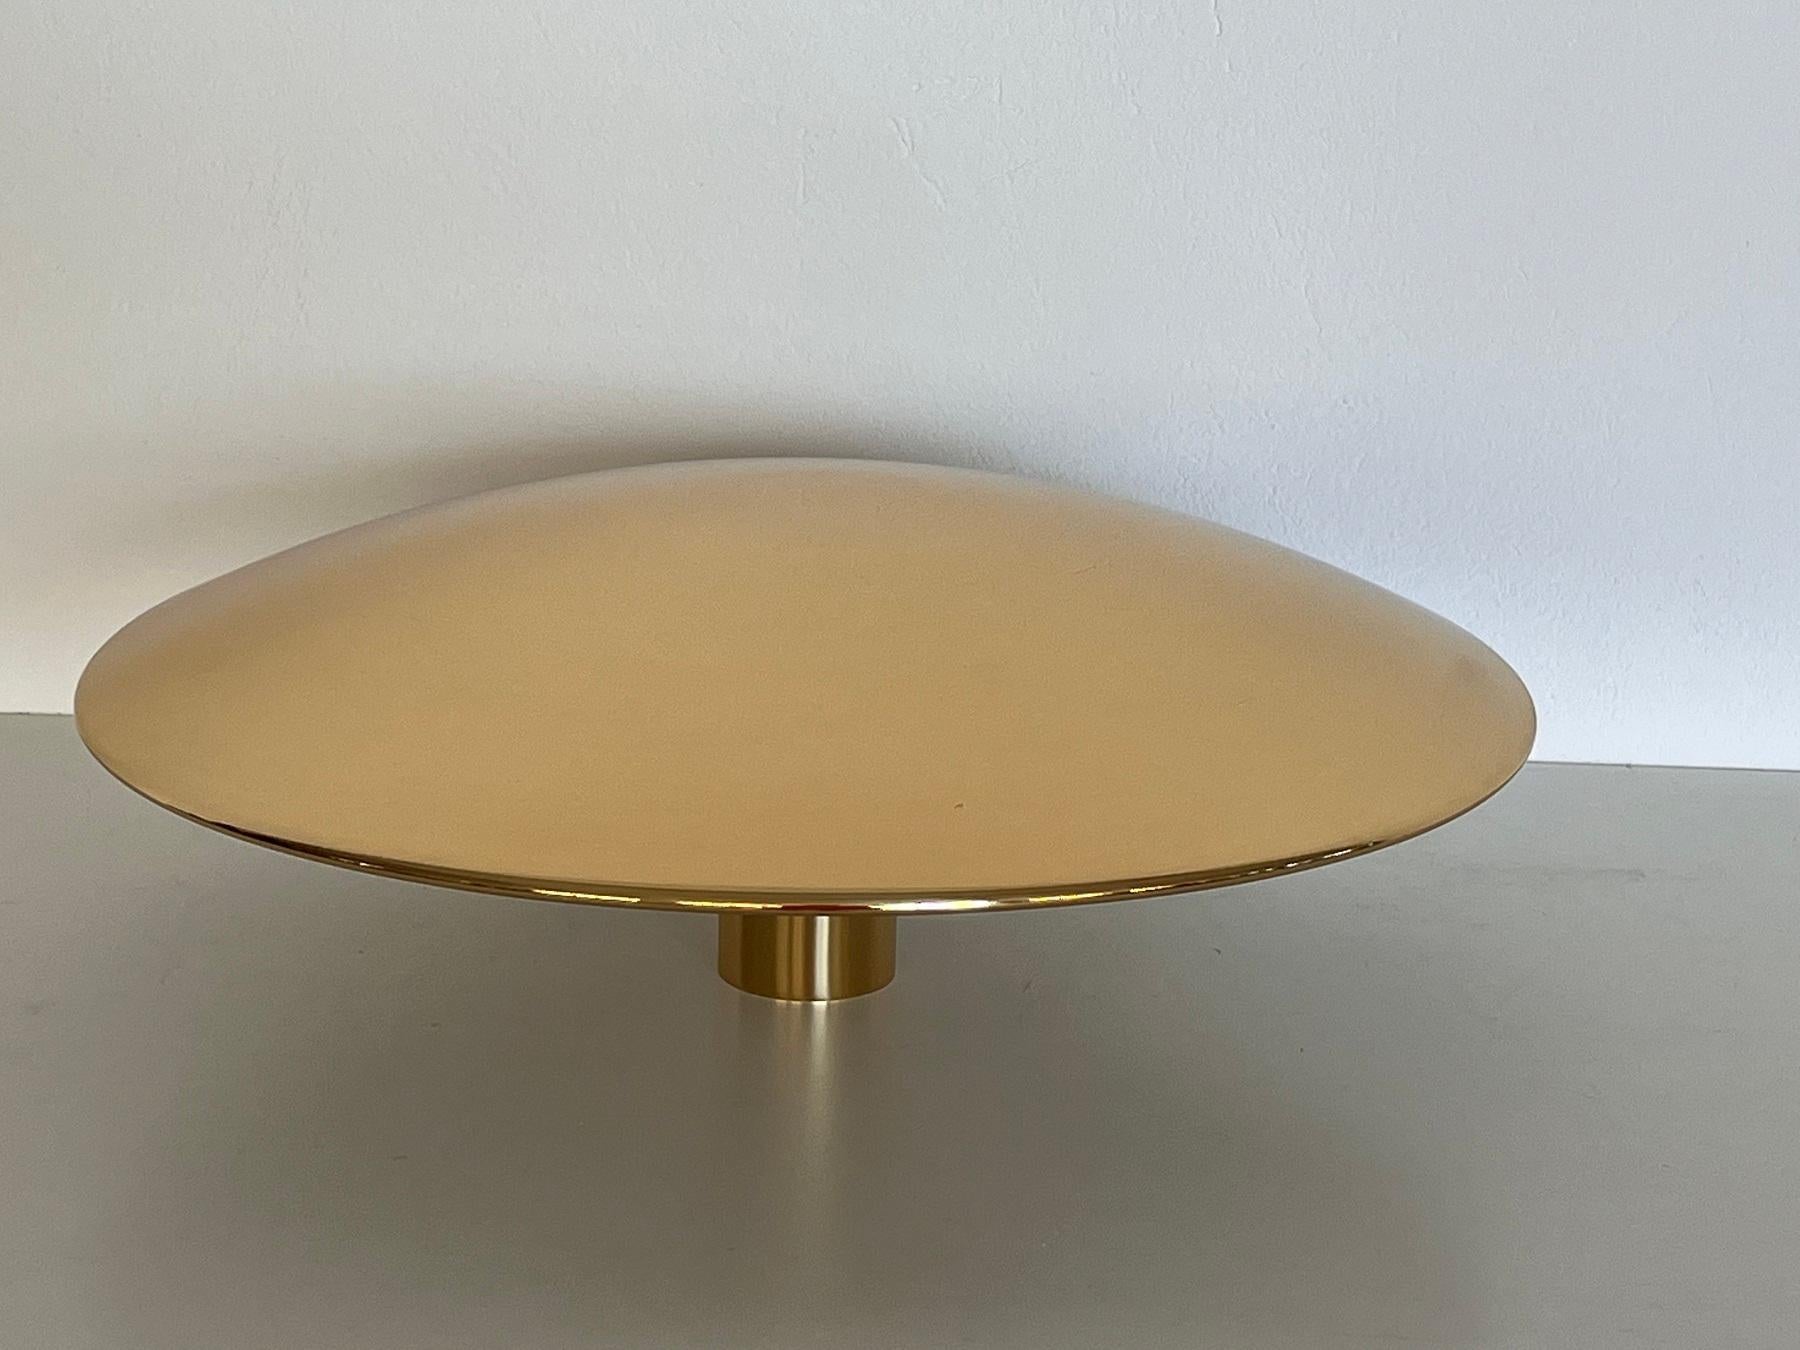 Late 20th Century Florian Schulz SELA Large Flush Mount Light in polished Brass, 1970s For Sale